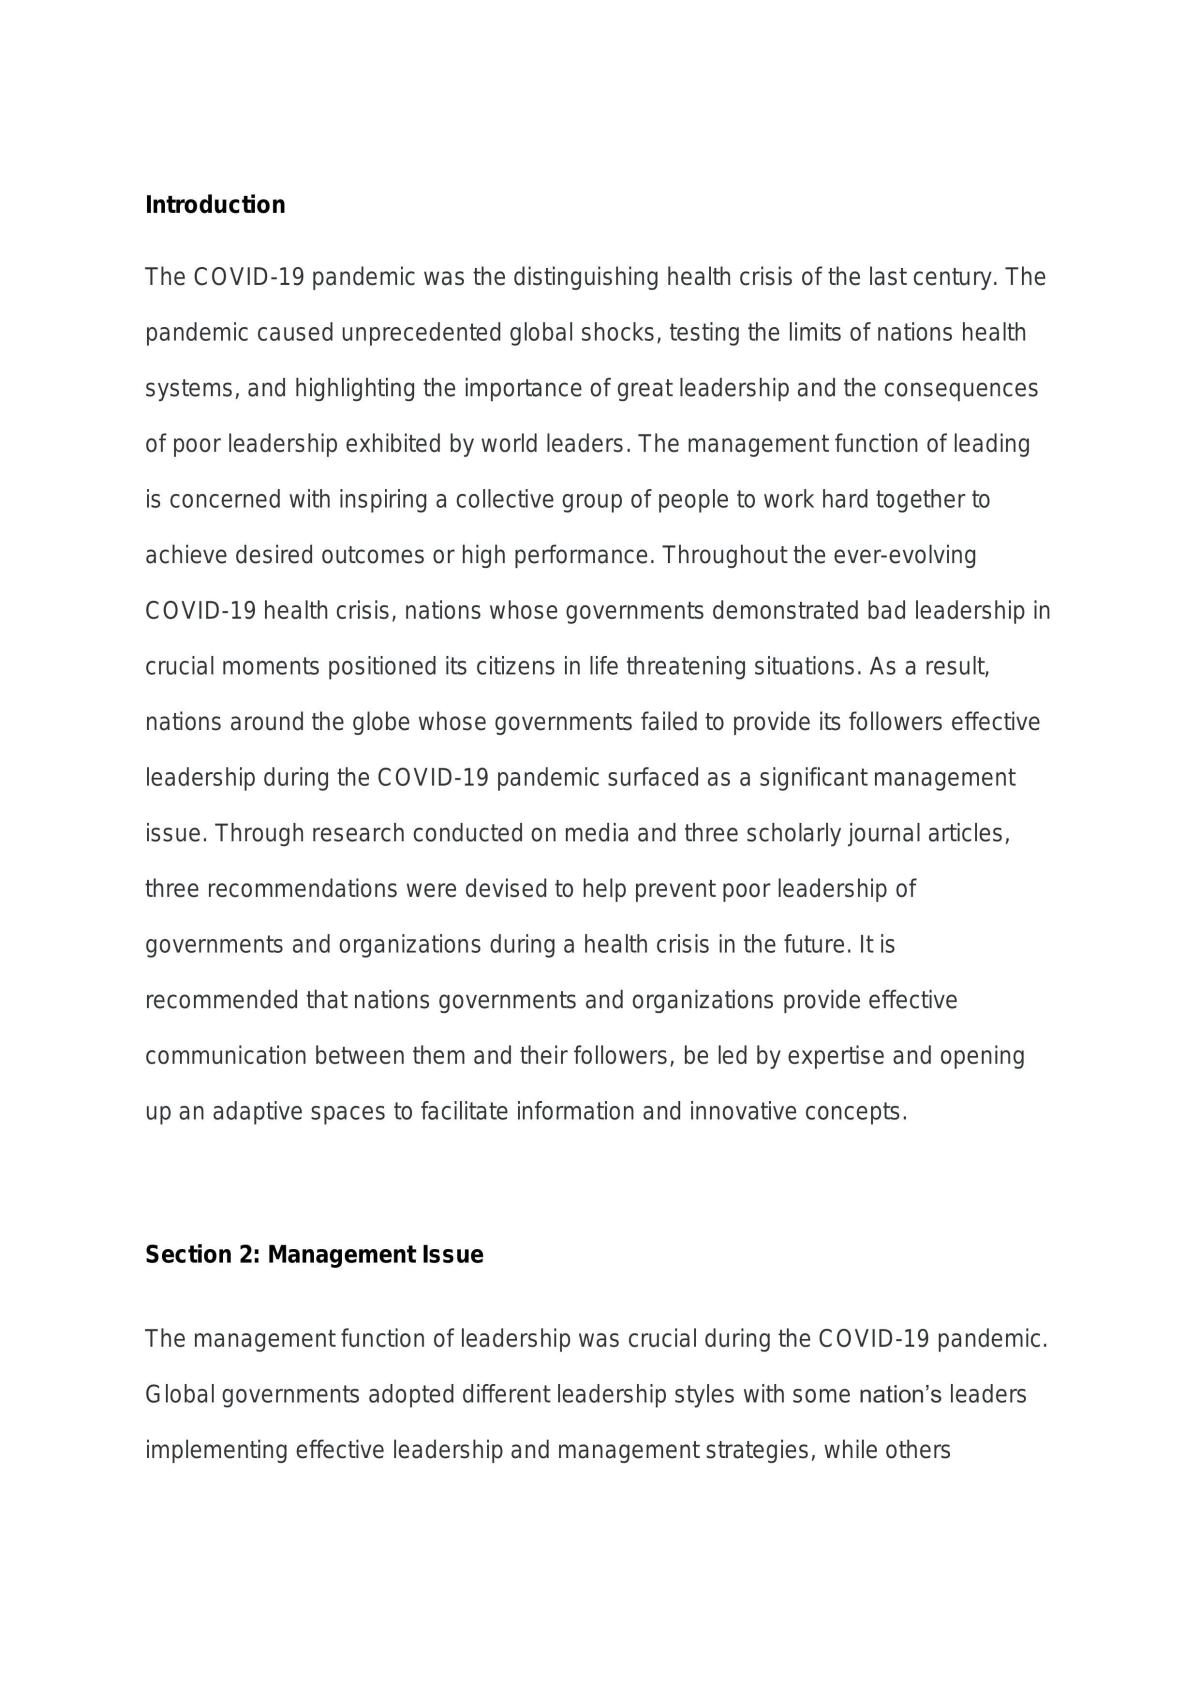 MGTS1301 COVID-19 Management Issue Assignment  - Page 2